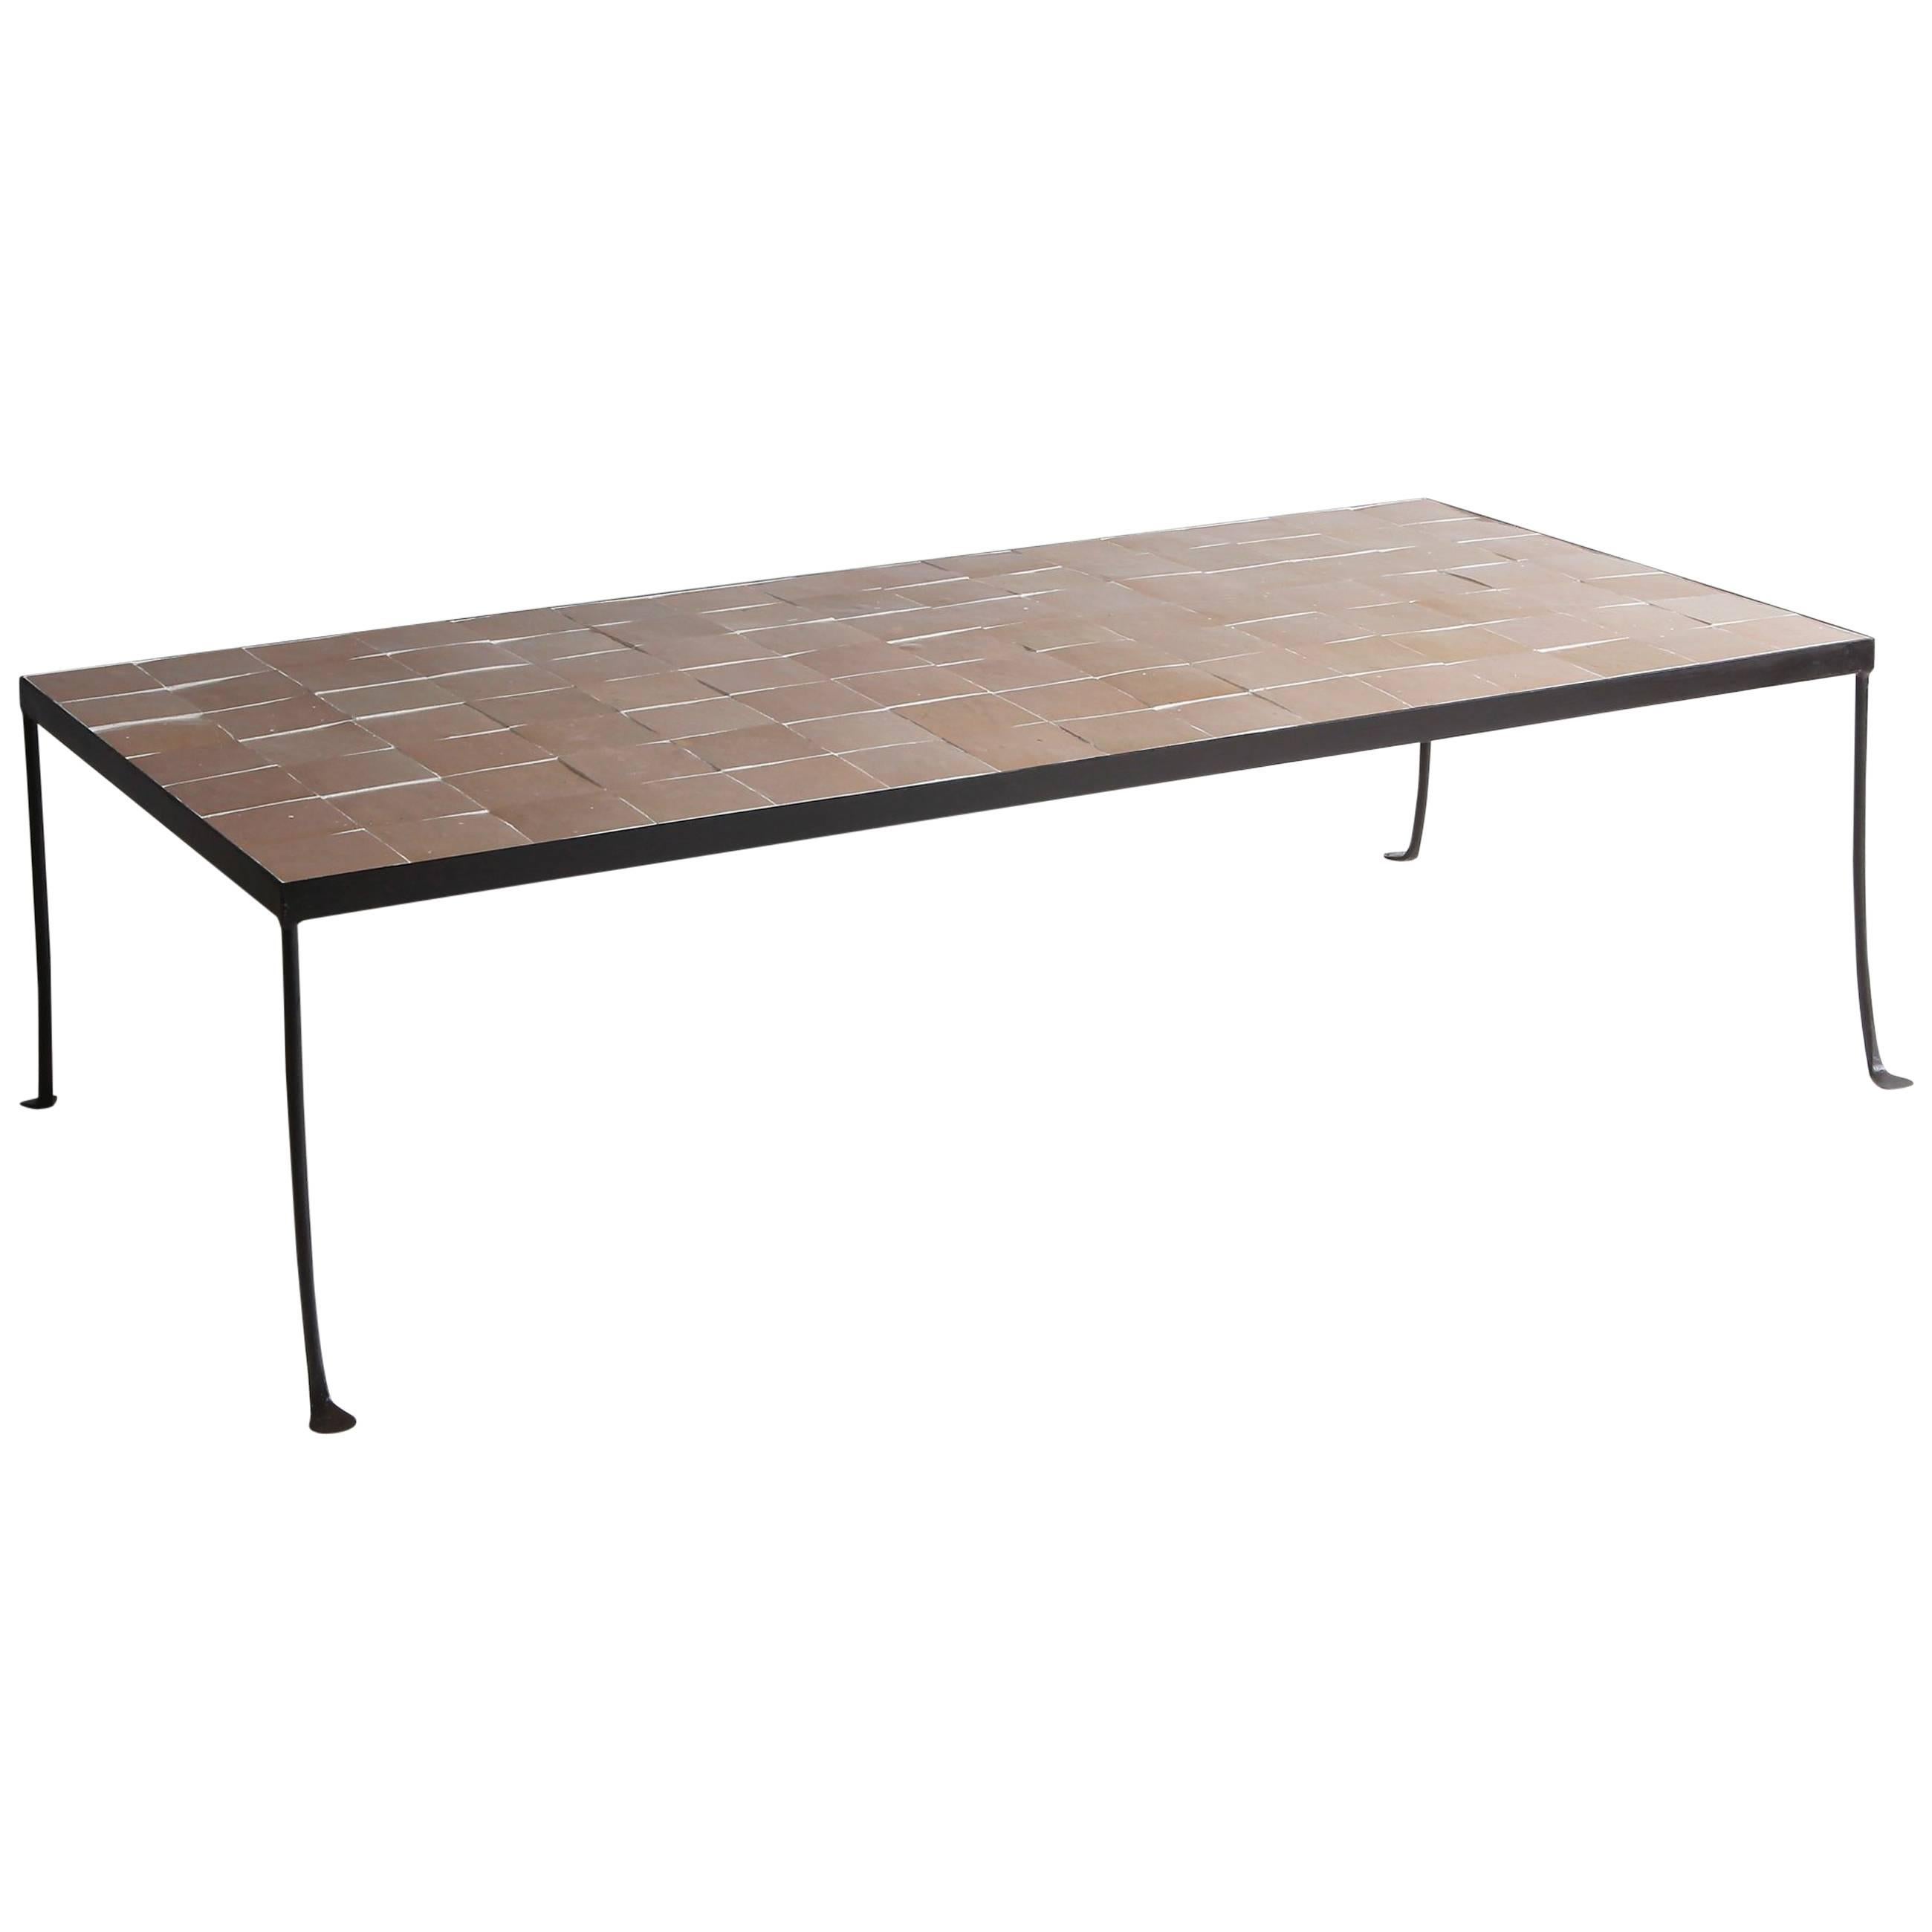 NK Collection Outdoor Wrought Iron Tiled Coffee Table in Putty